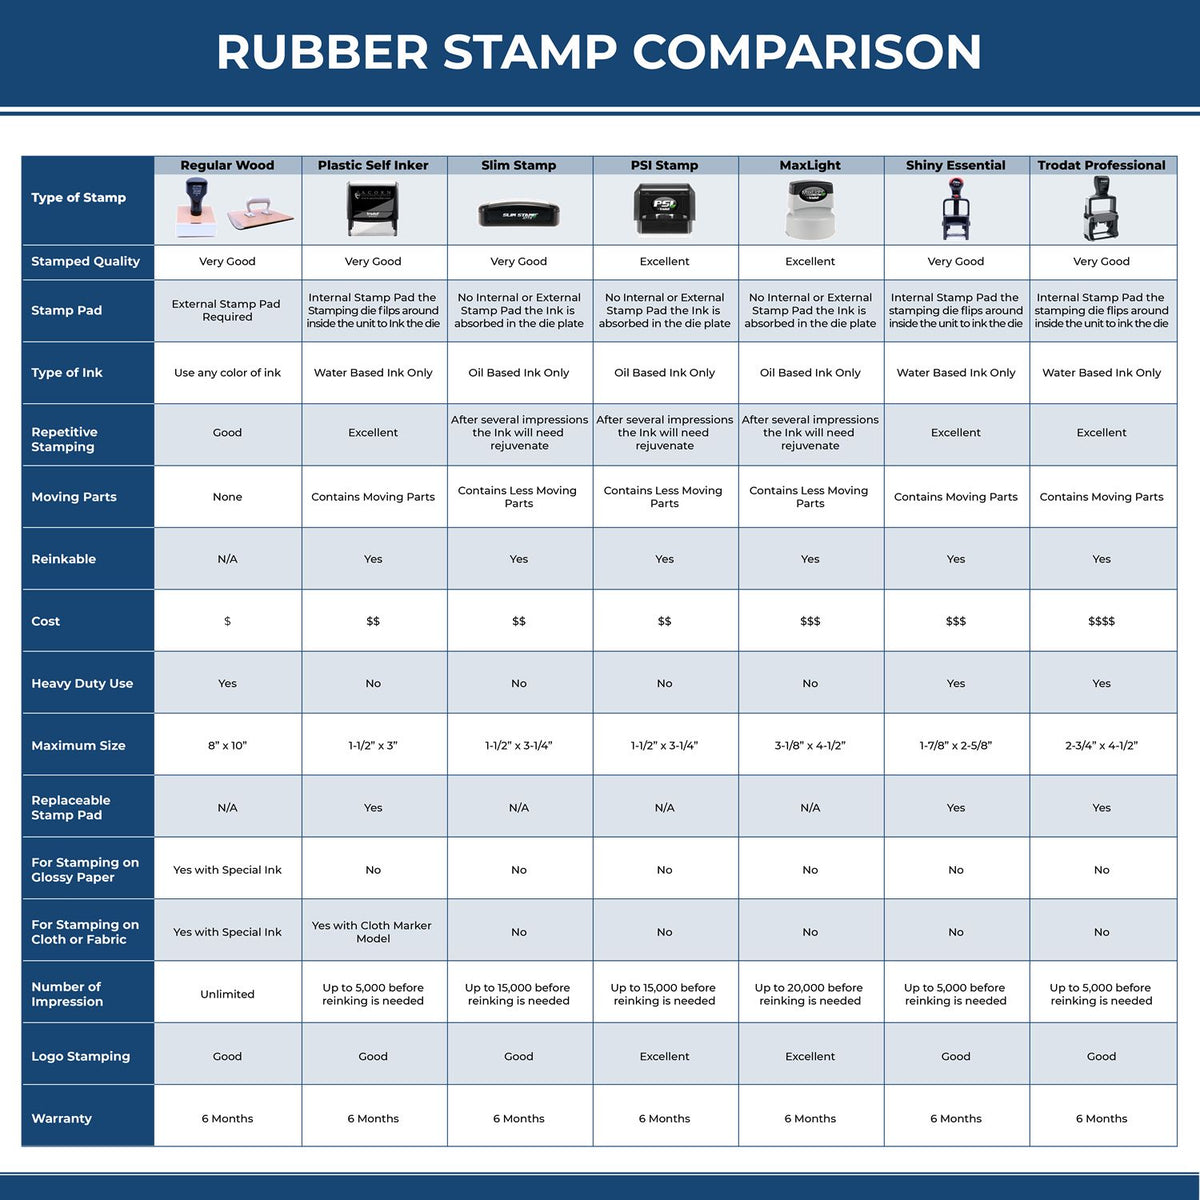 A comparison chart for the different types of mount models available for the Slim Pre-Inked Rectangular Notary Stamp for Pennsylvania.